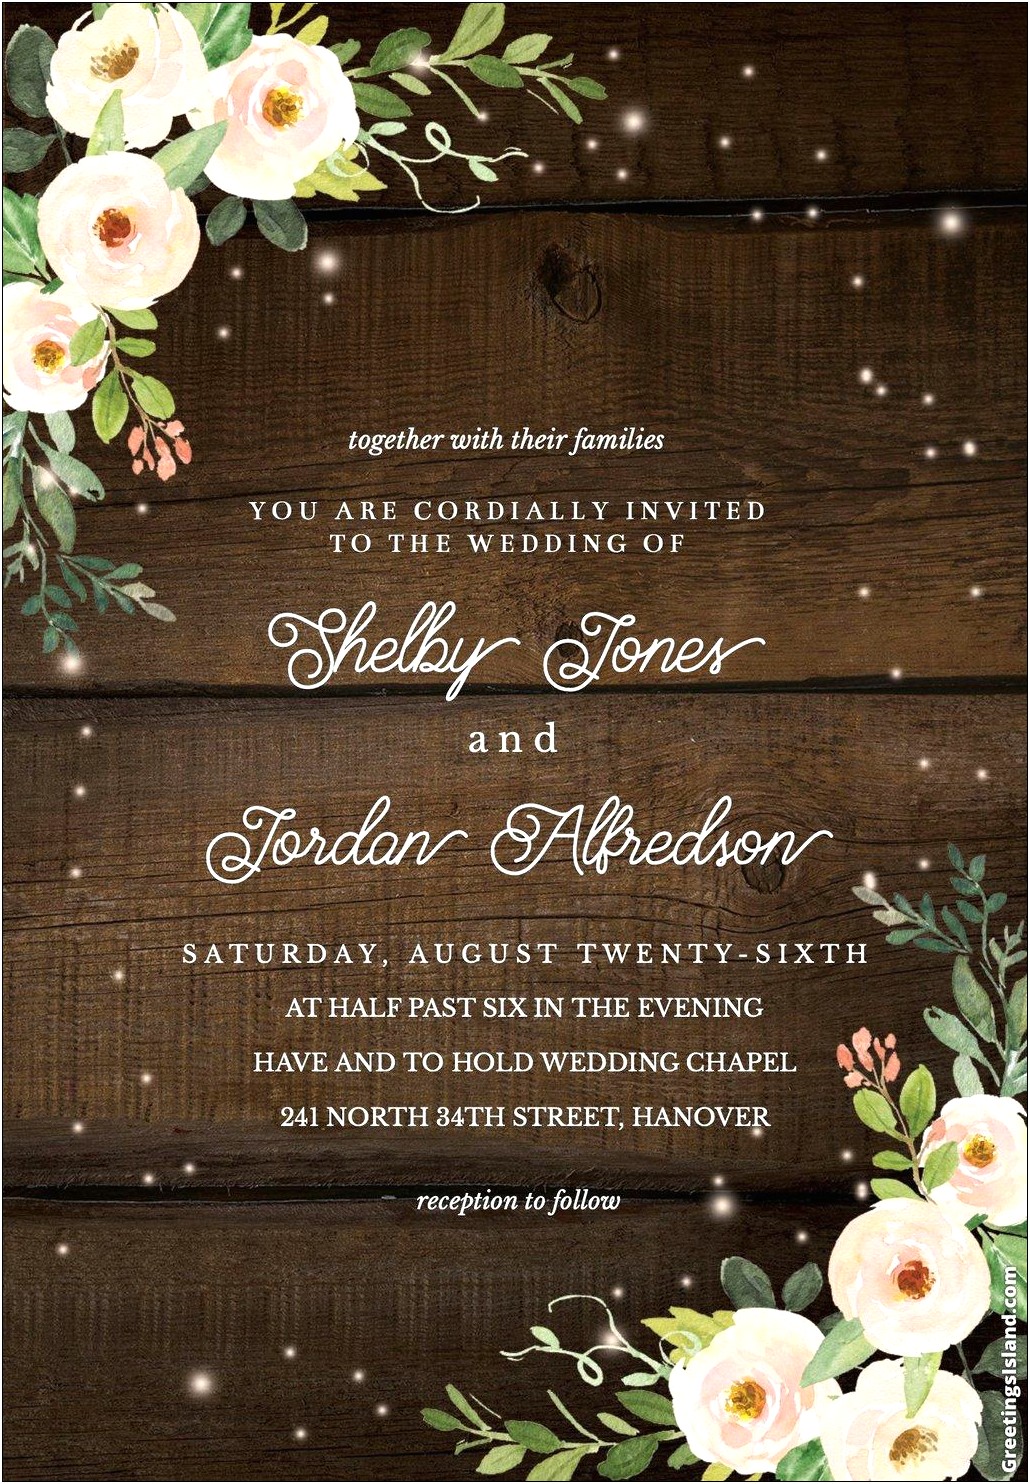 Create Your Own Wedding Invitations Free Sp